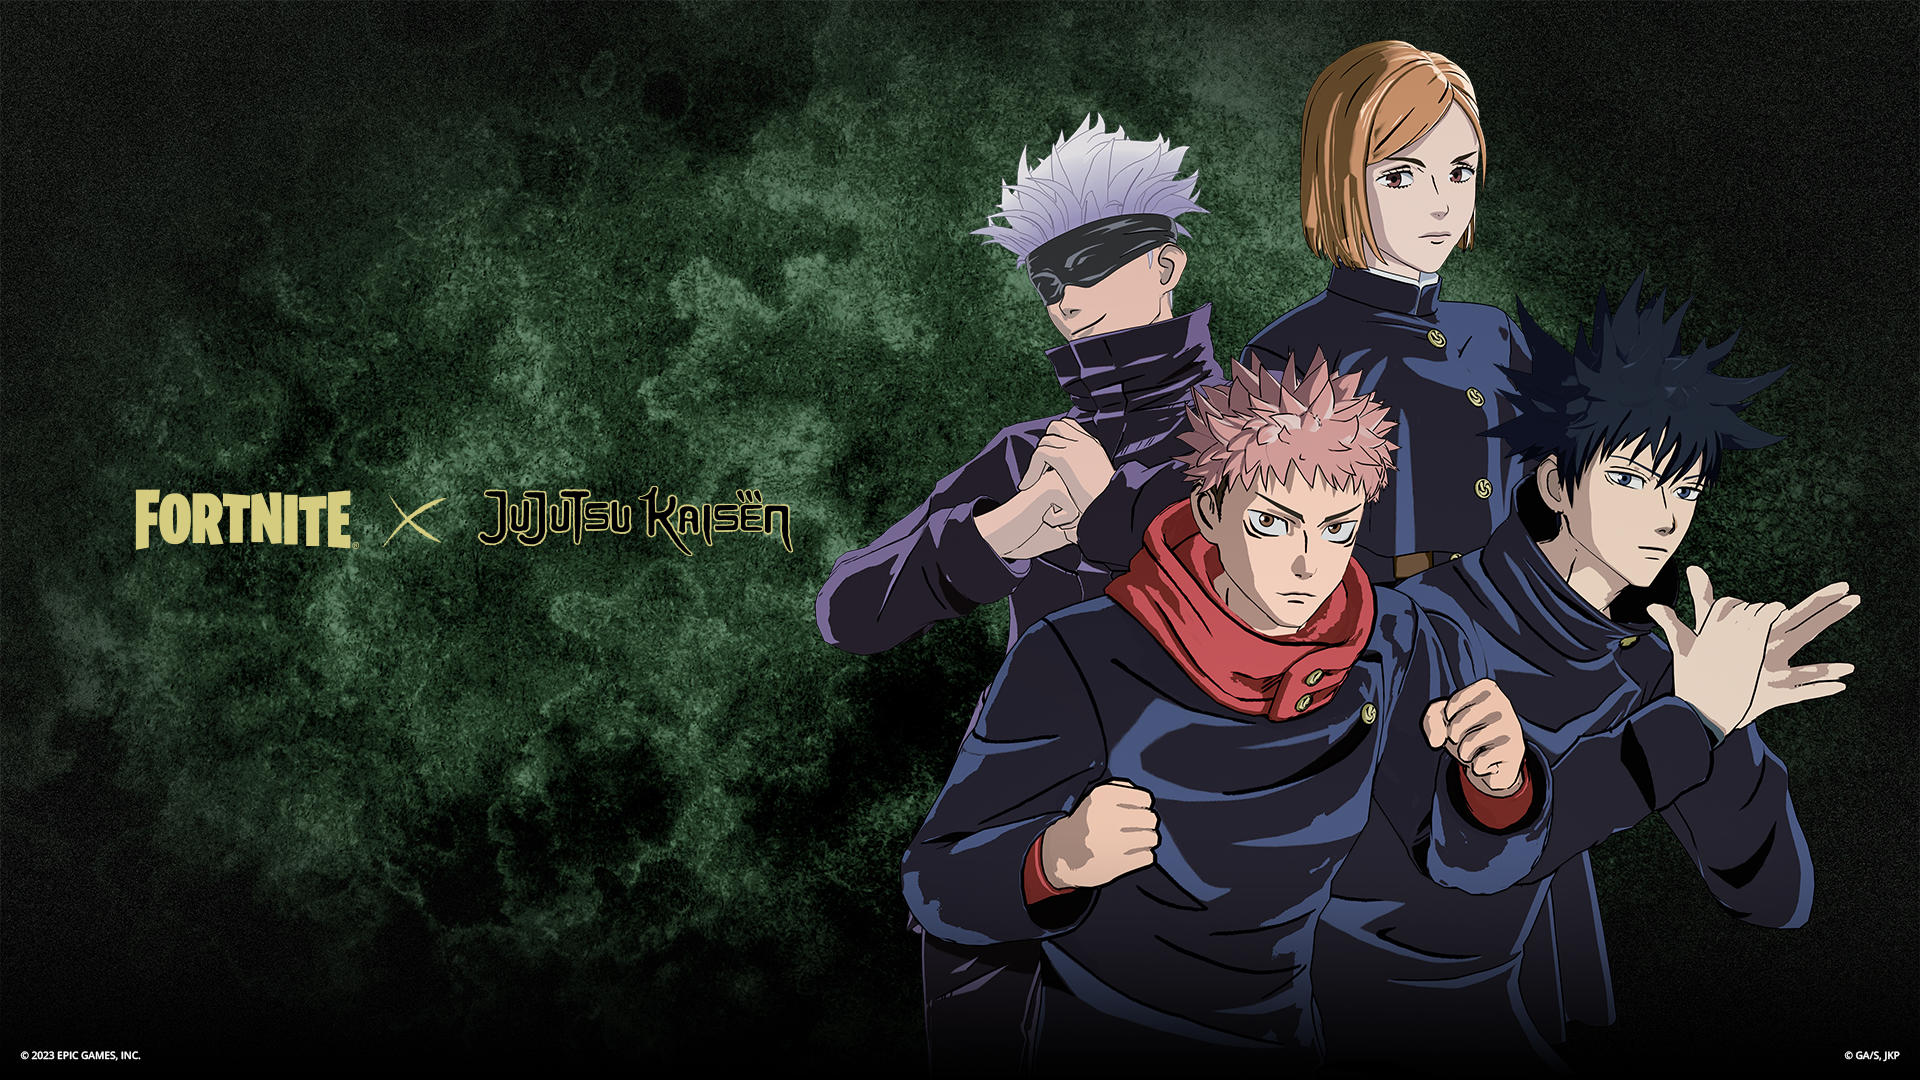 Jujutsu Kaisen Cursed Clash takes the popular anime into the realm of 3D  brawlers